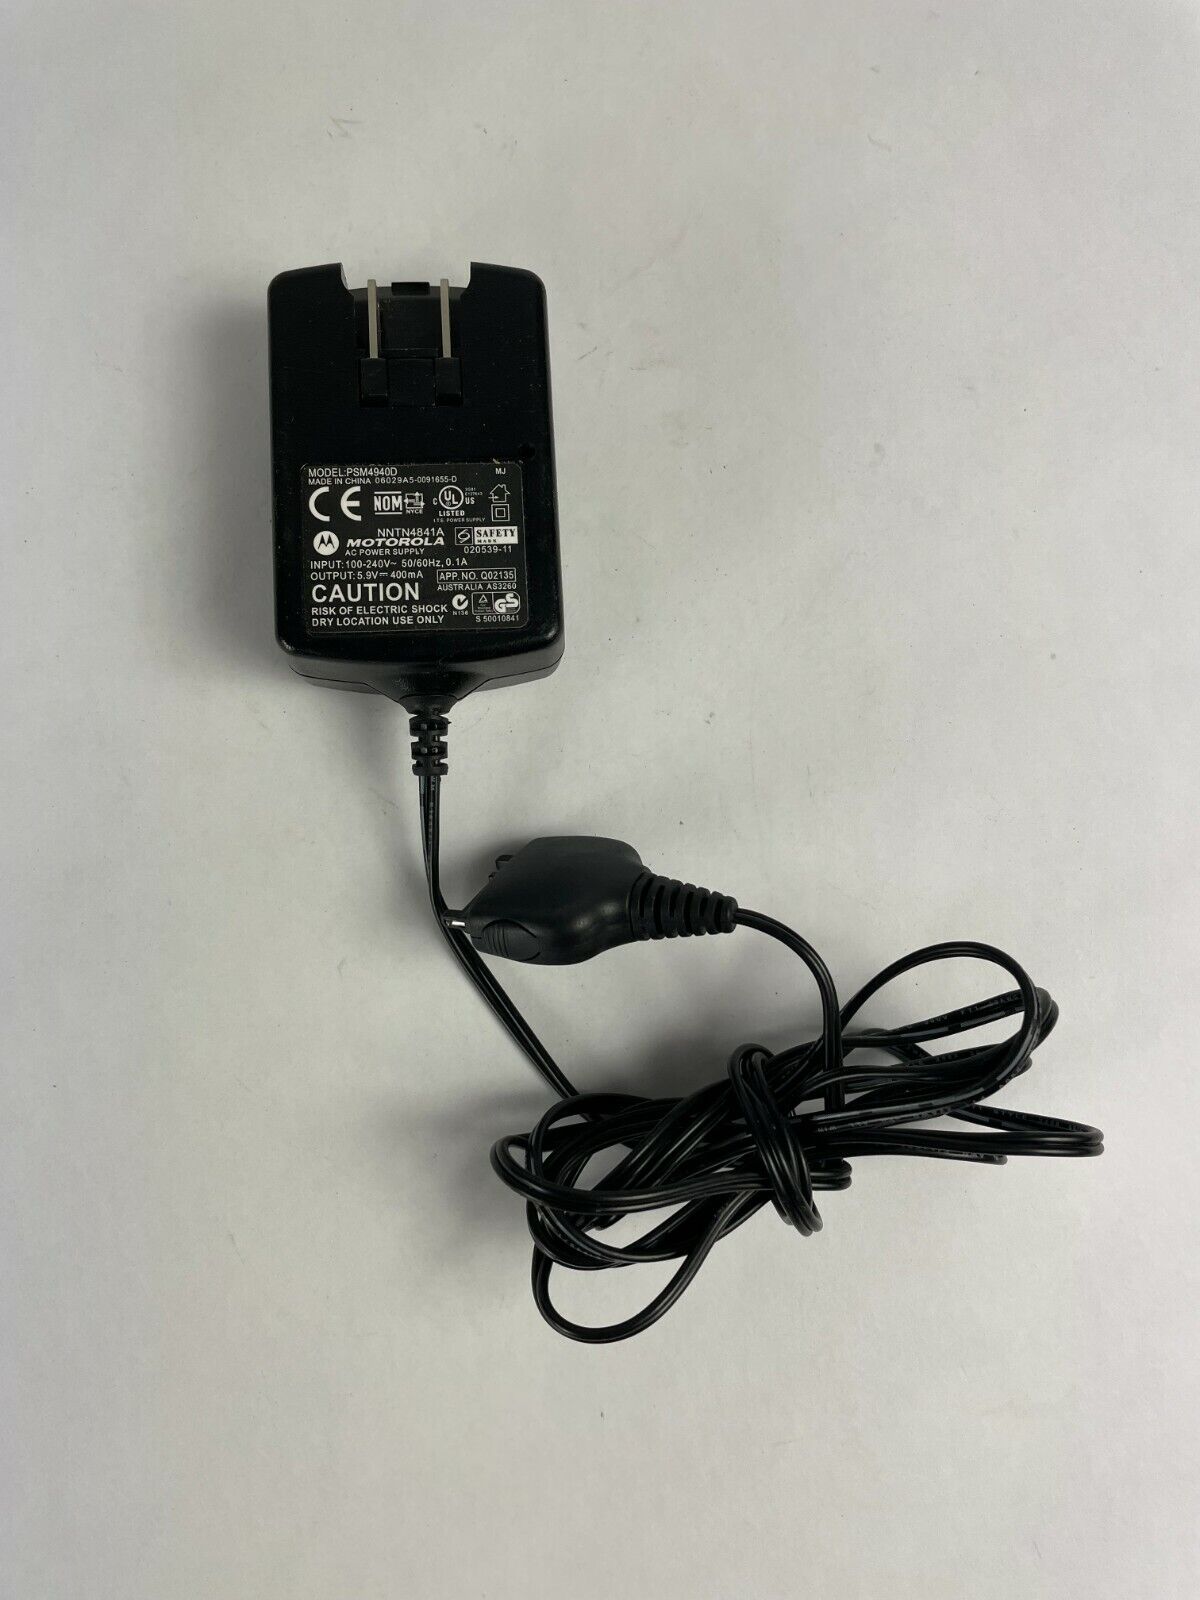 Genuine Motorola PSM4940D AC Adapter Output 5.9 V 400mA Power Supply Adapter A29